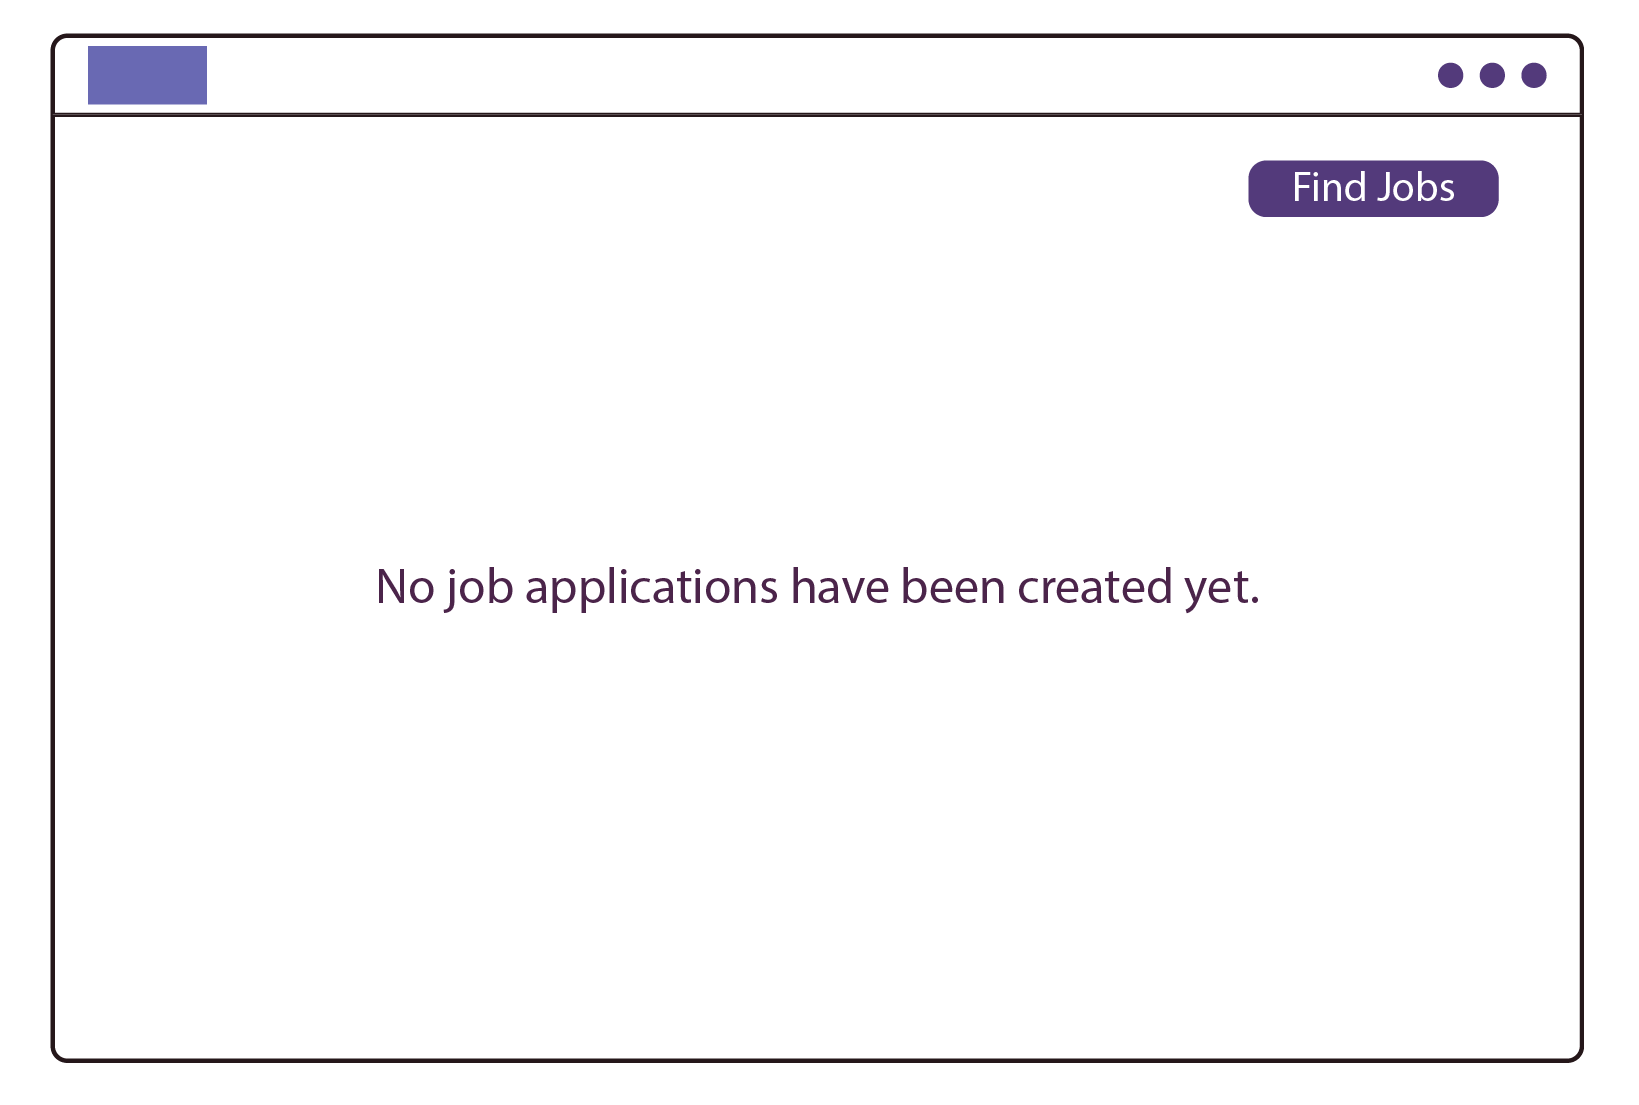 No job applications have been created yet